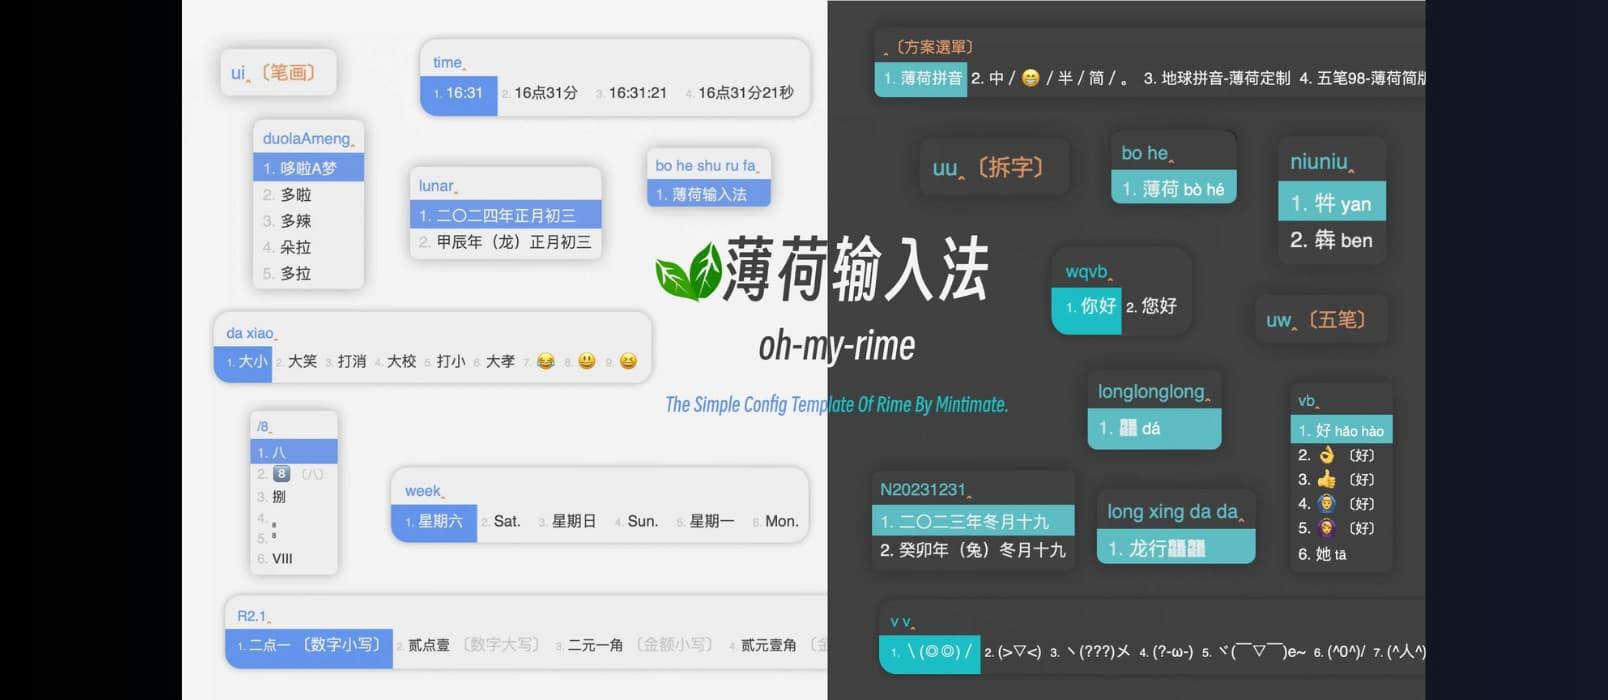 Mint Input Method (oh-my-rime) - Cross-platform Rime Input Method Configuration Suite: No Privacy Tracking, Completely Open Source, Highly Customizable